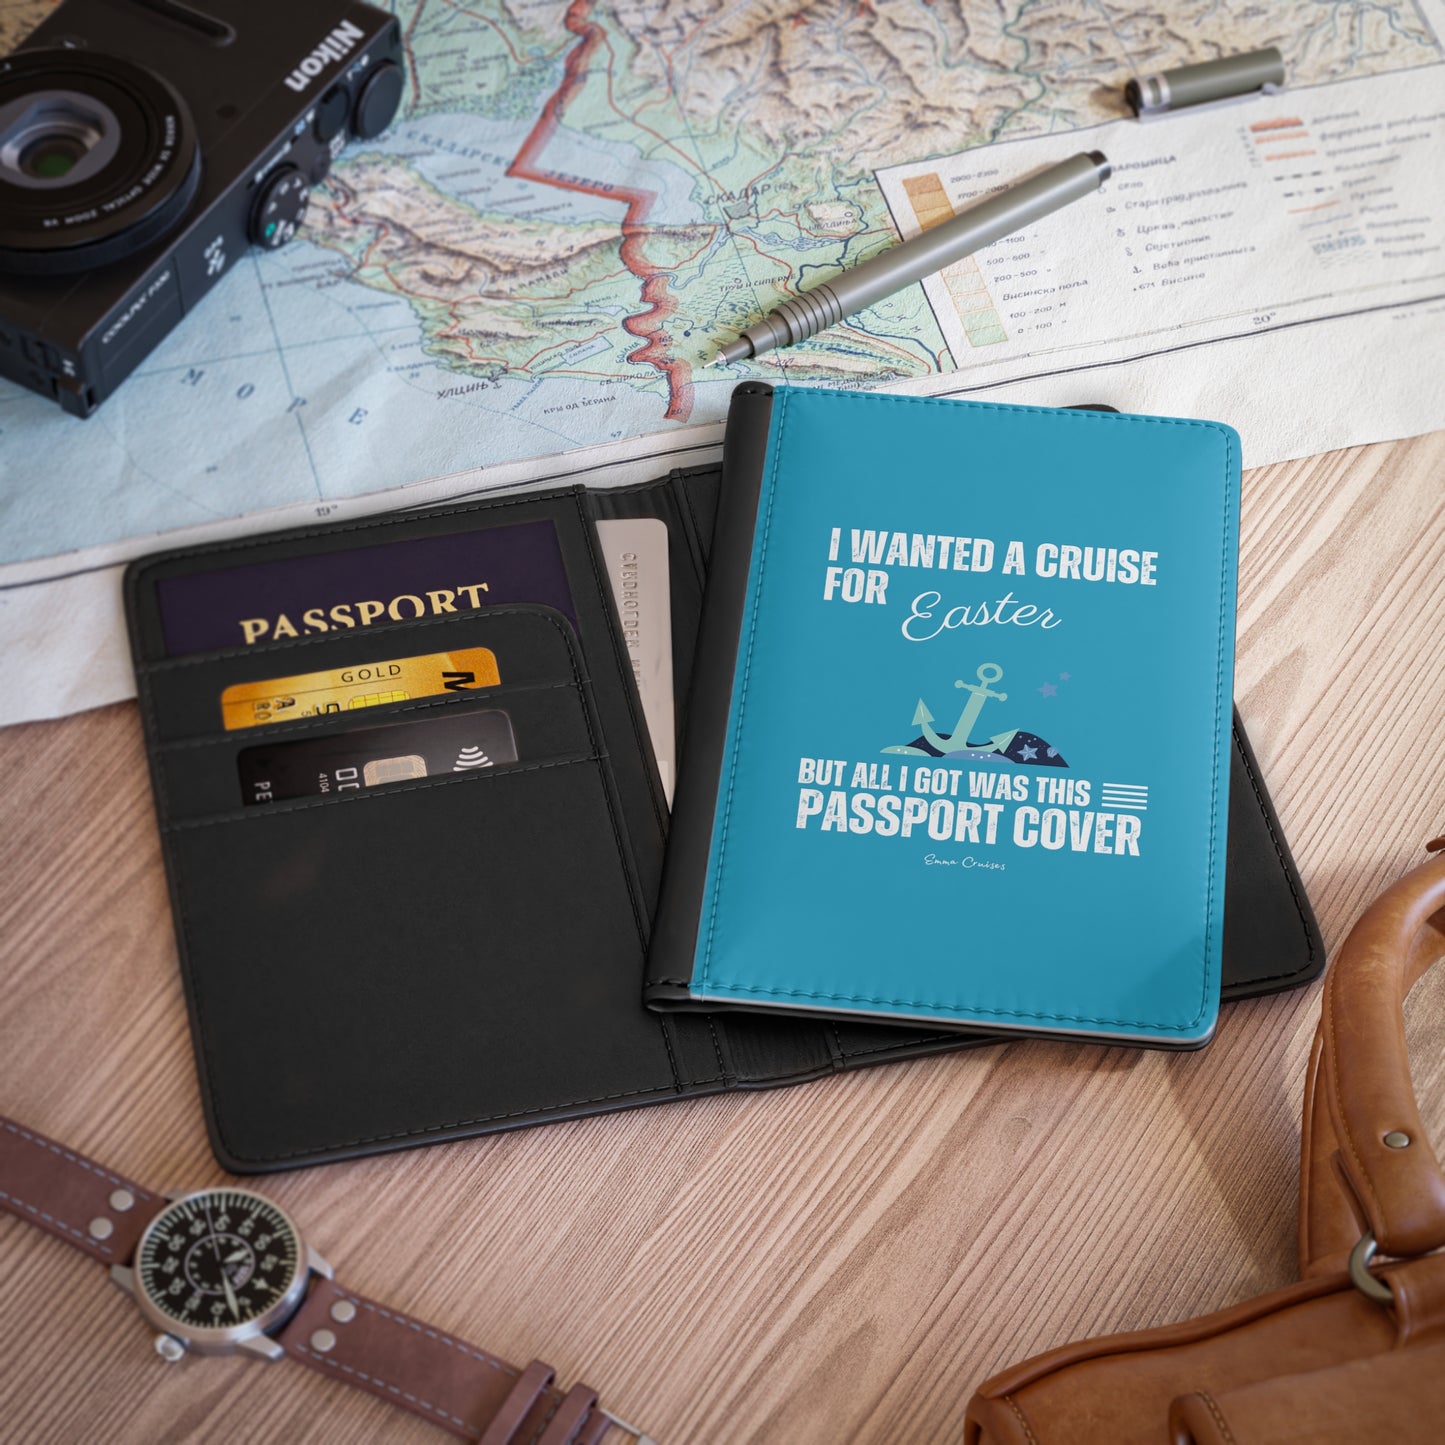 I Wanted a Cruise for Easter - Passport Cover